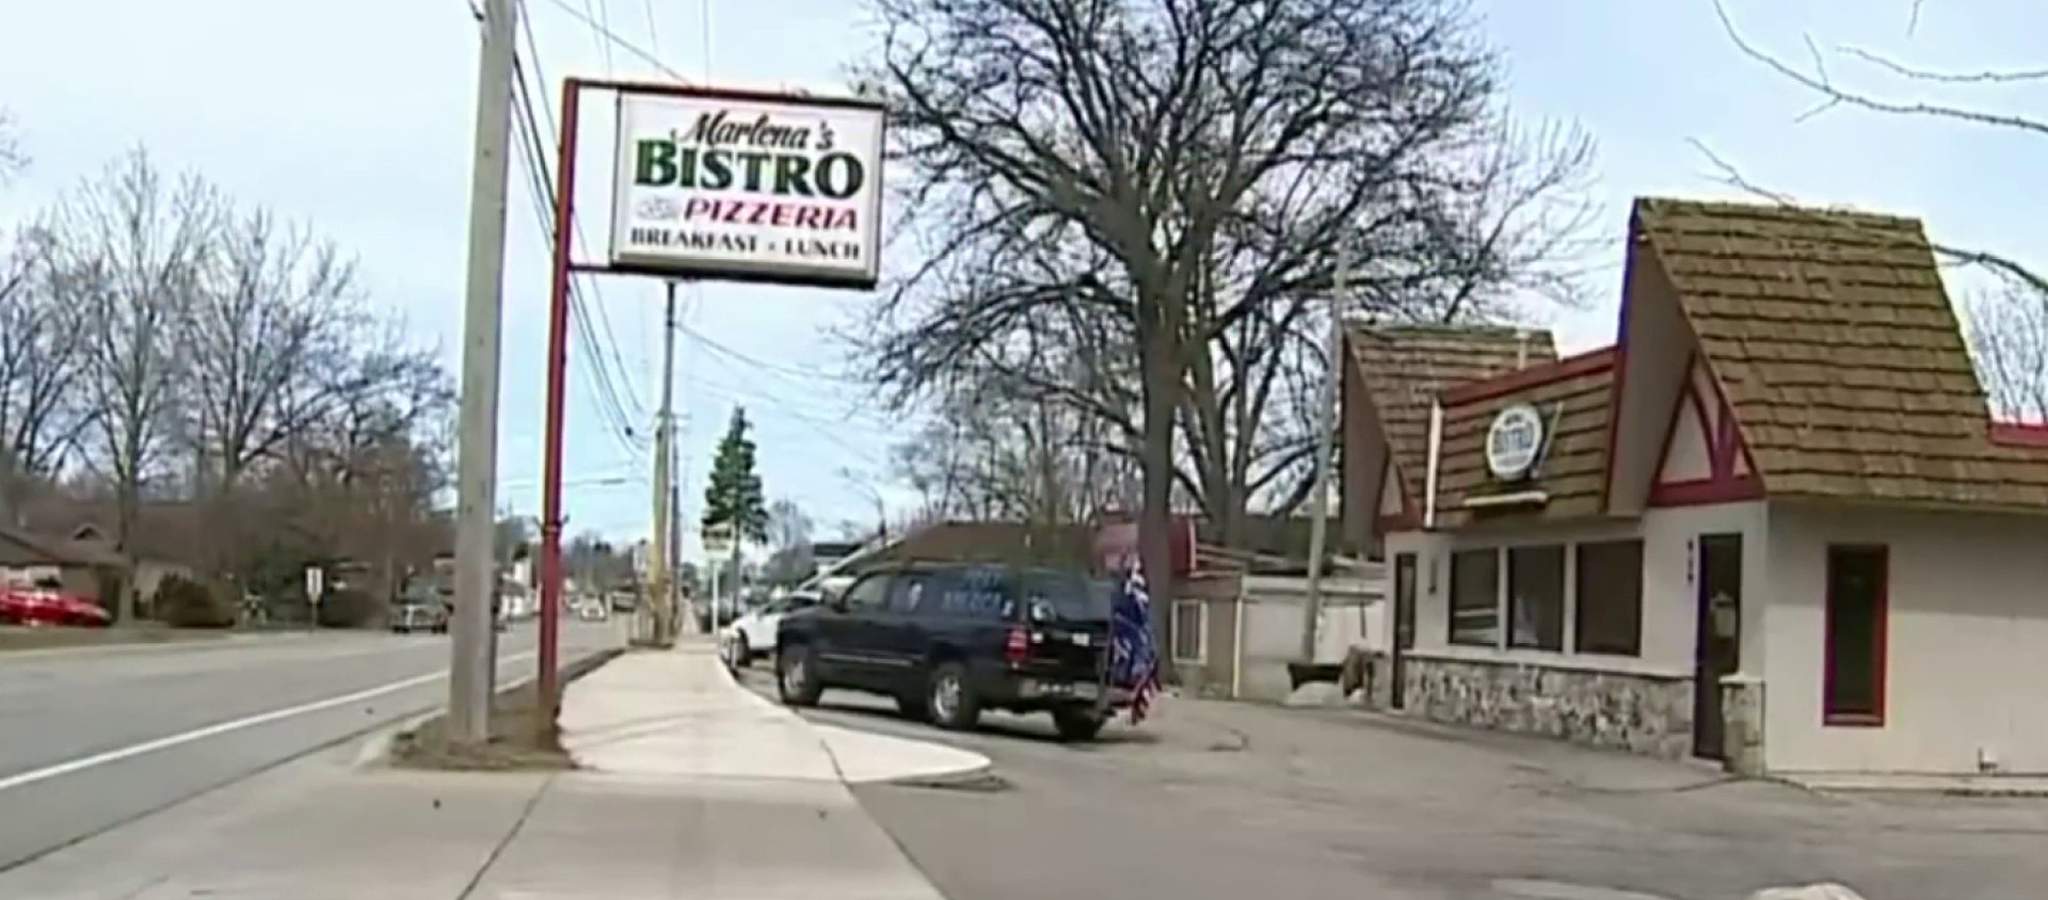 Holland restaurant owner arrested for violating Michigan health orders, state says